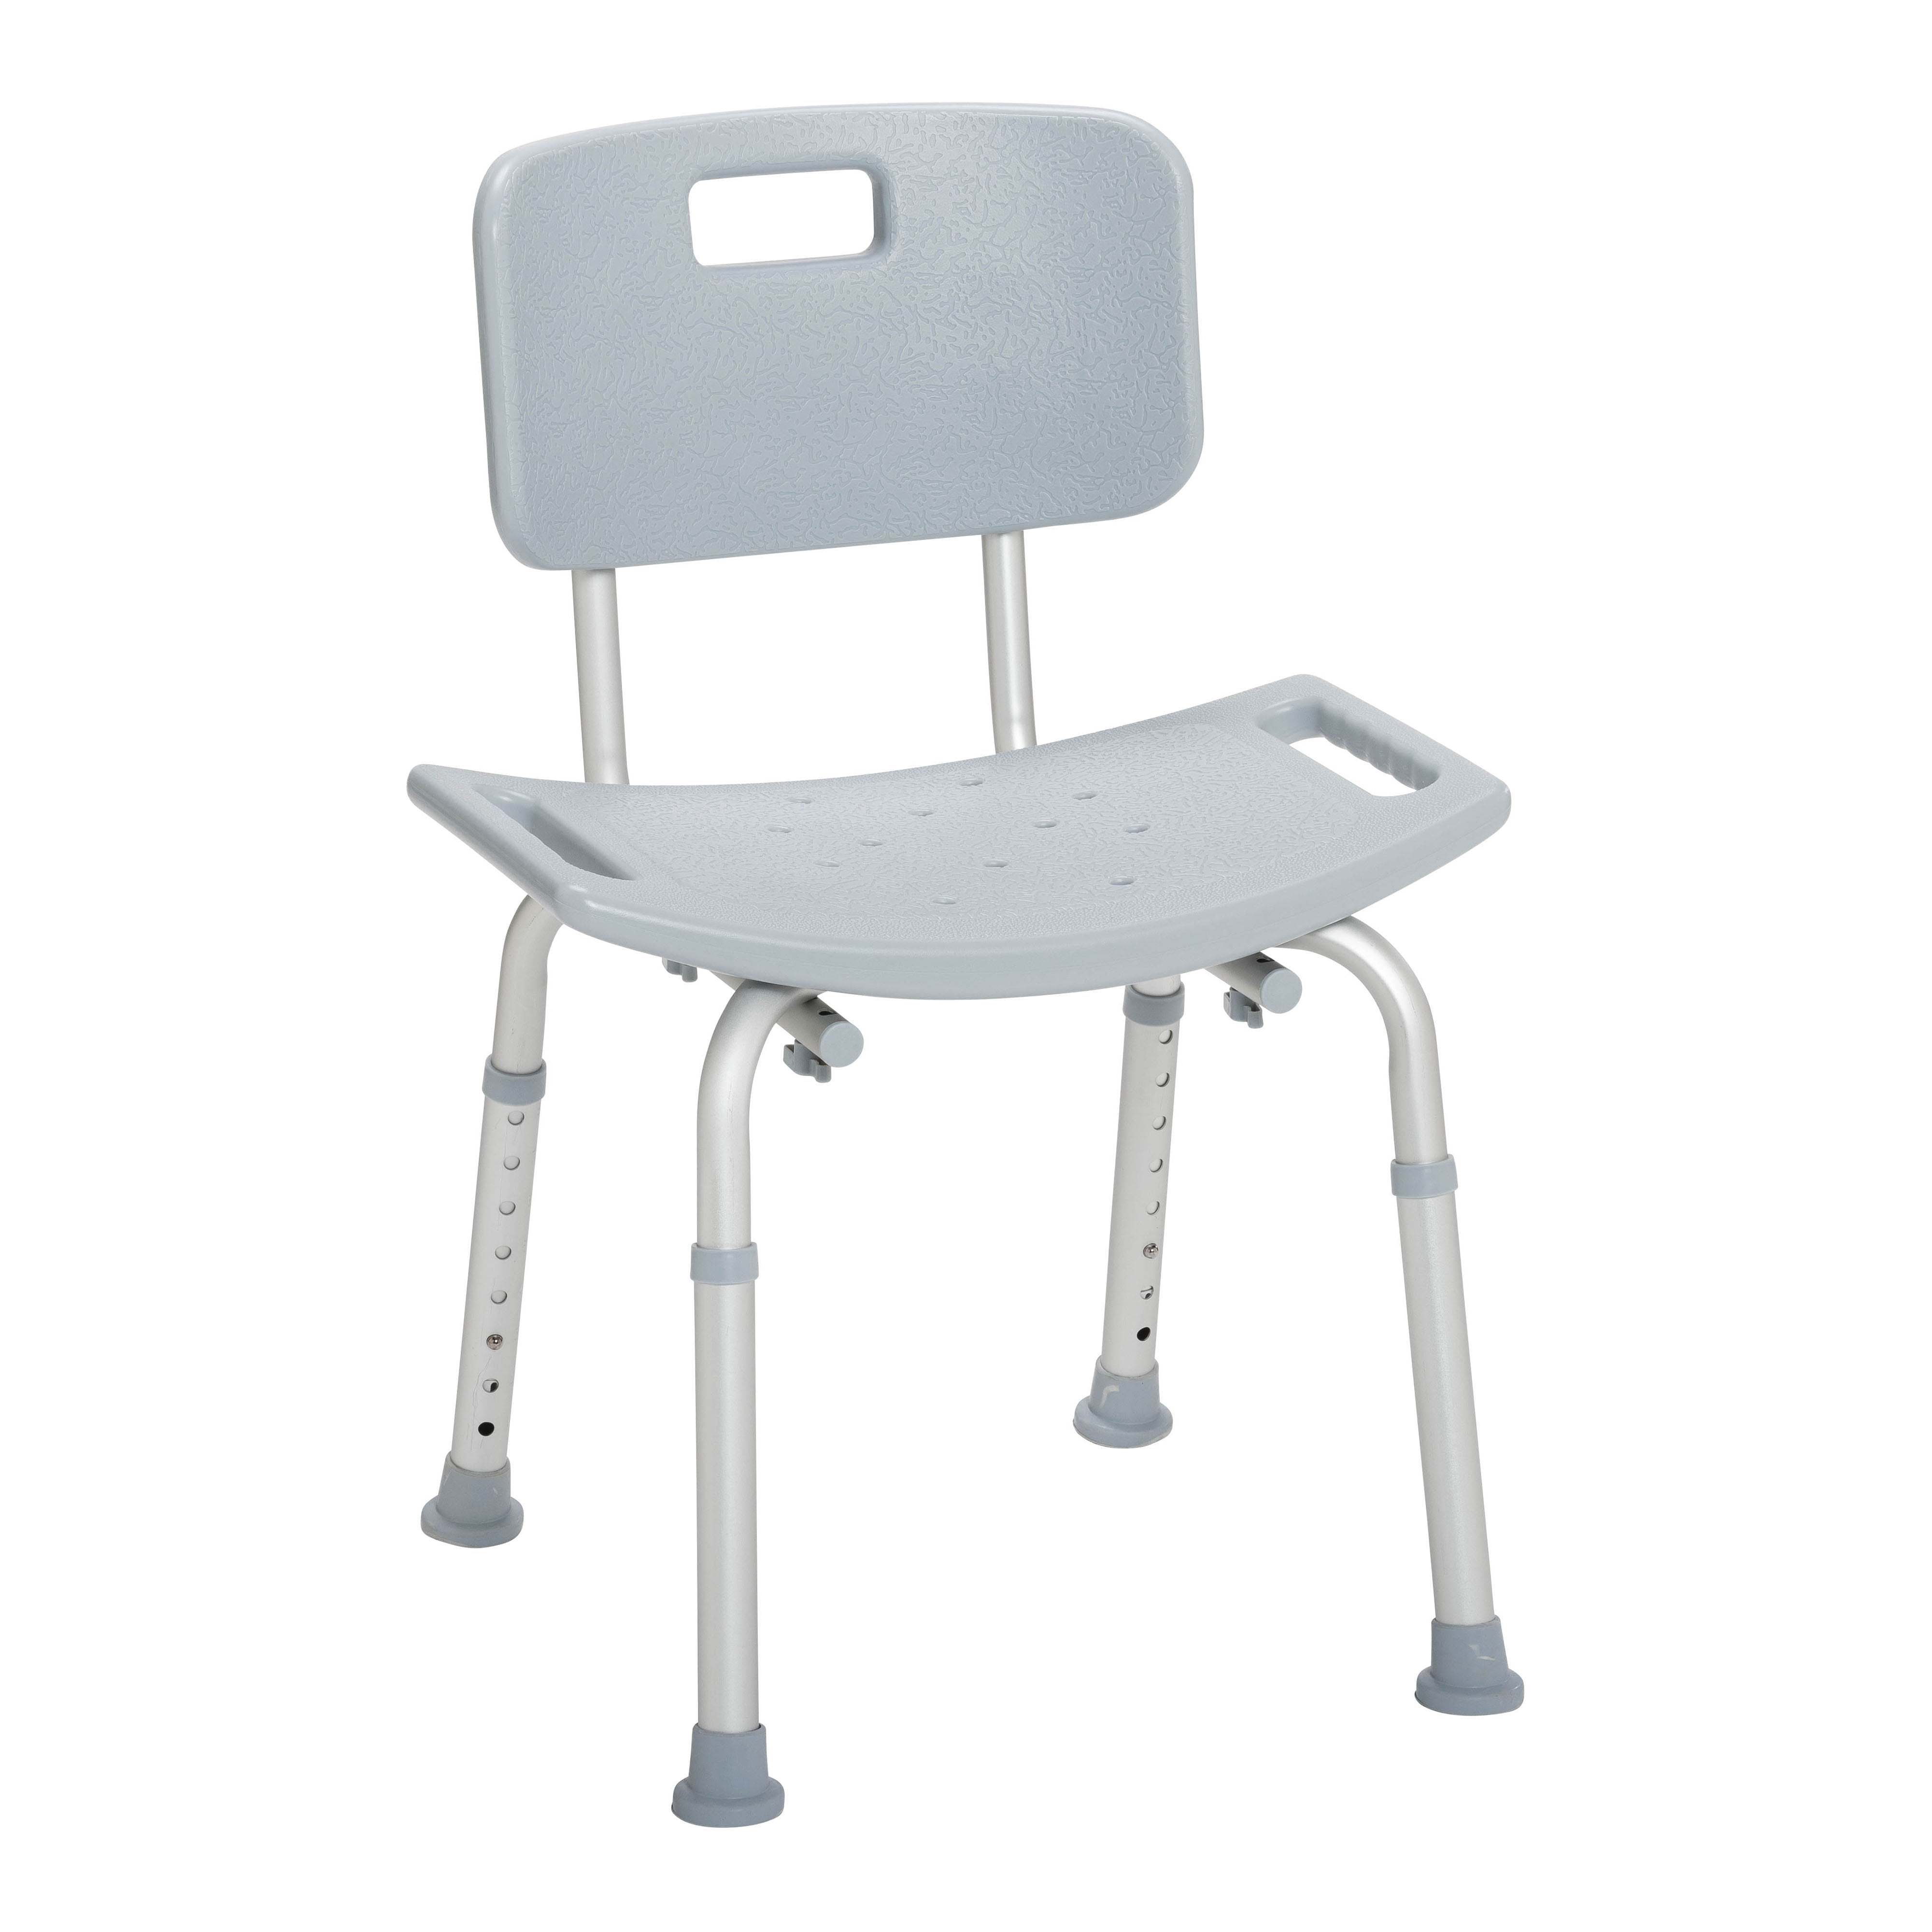 US Medical Seat Bathtub Bench Chair Shower Stool Handicap Old man Backless Bench 